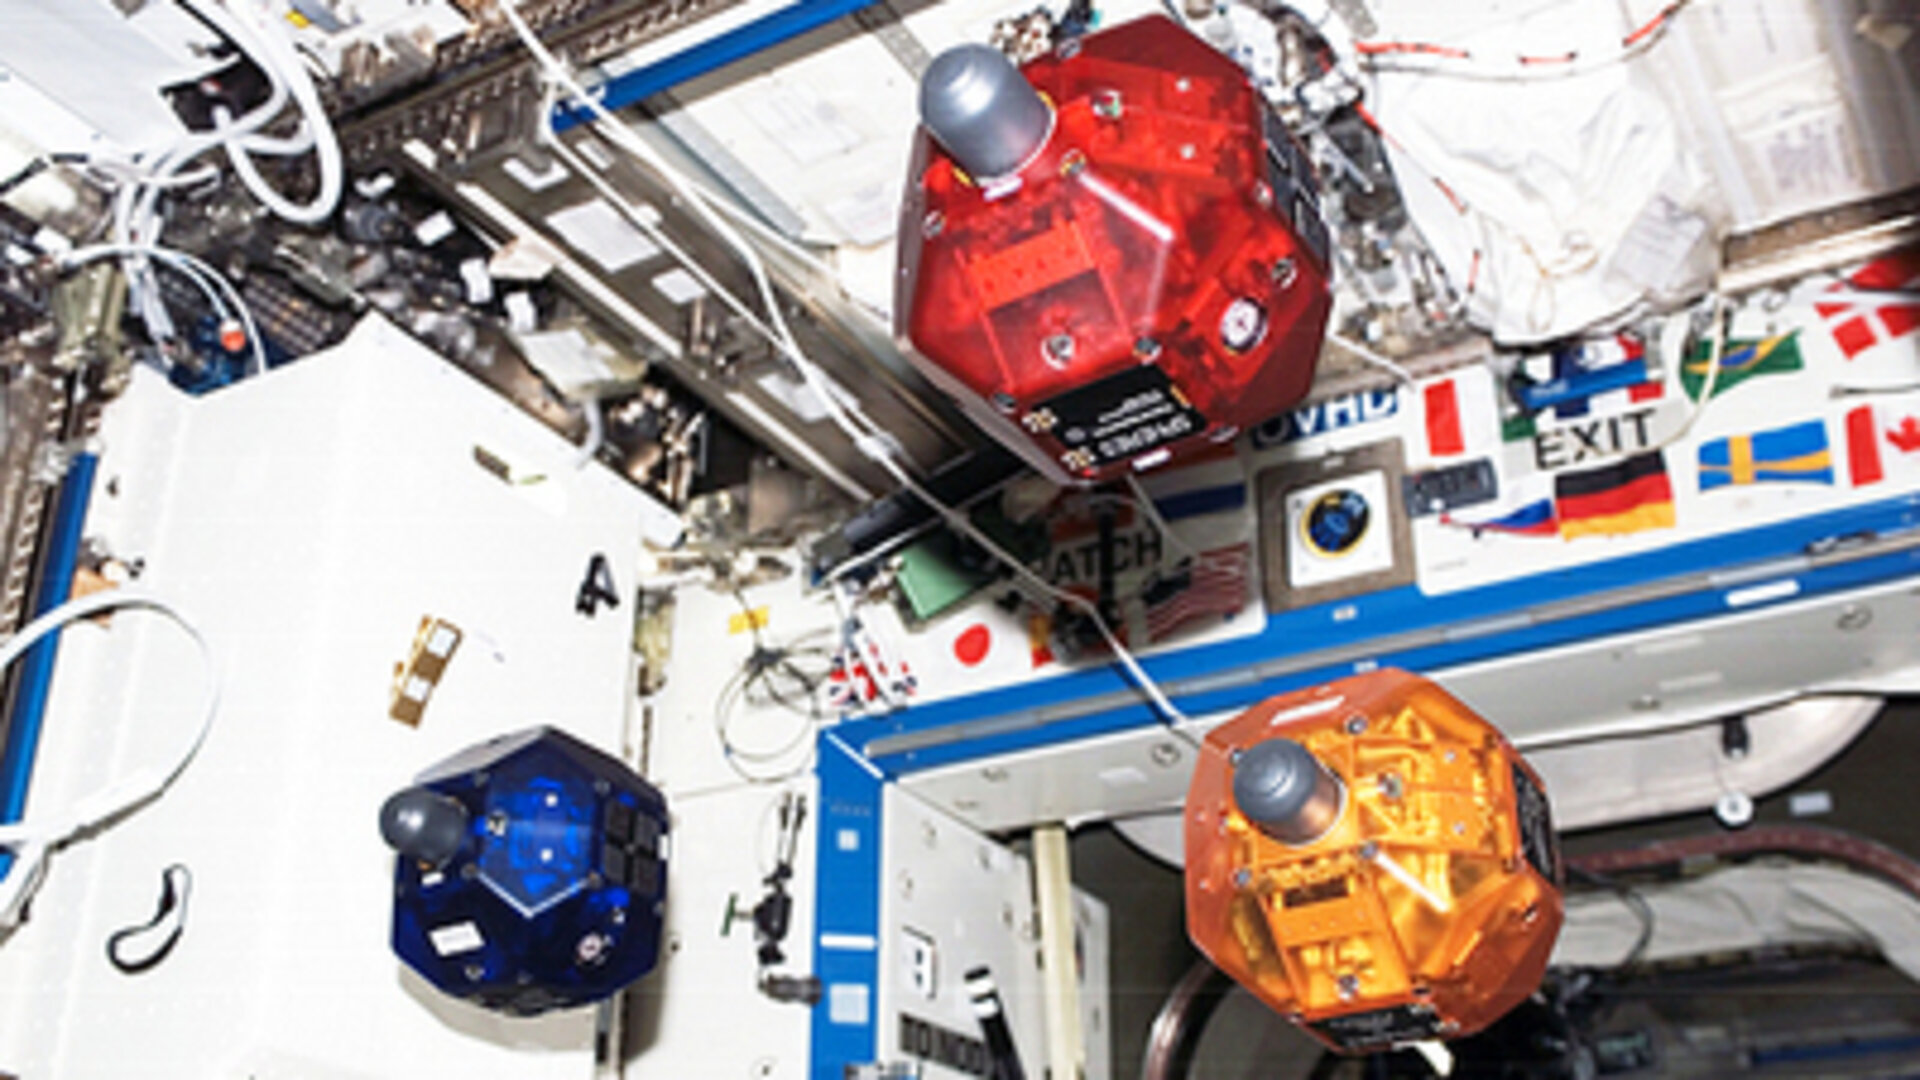 Spheres on Station